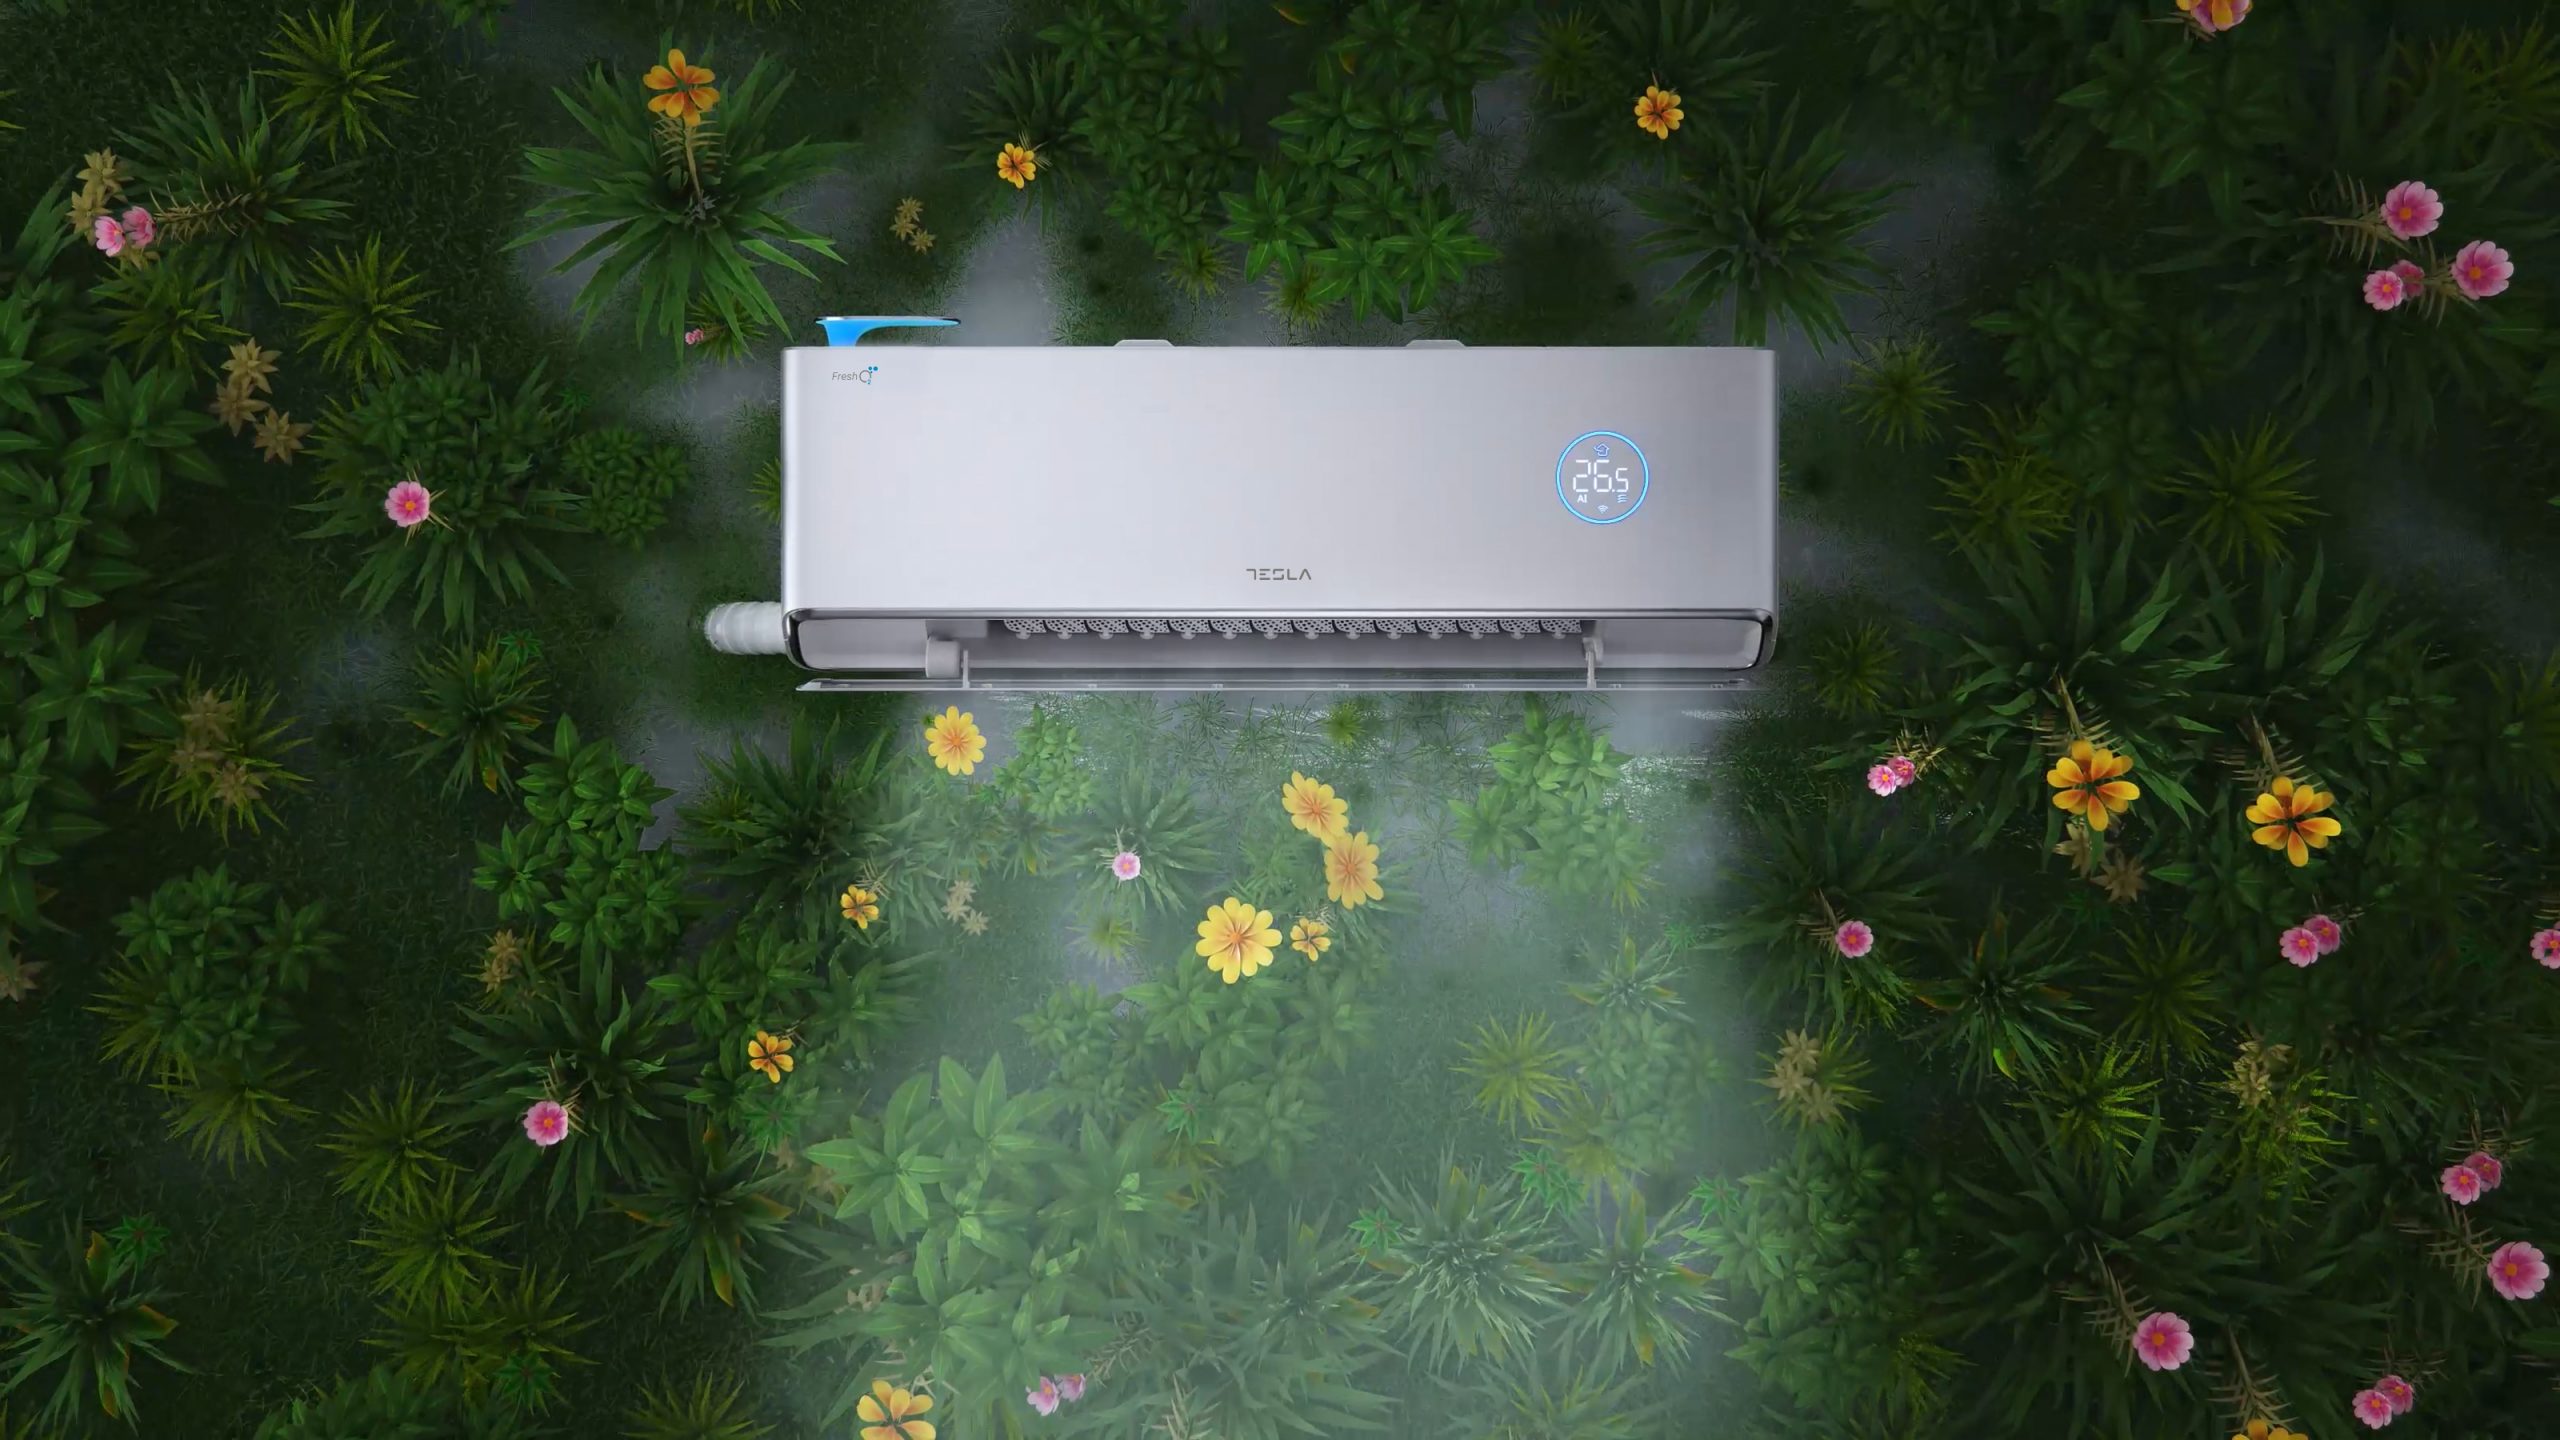 WHAT’S NEW IN TESLA AIR CONDITIONERS IN 2022?